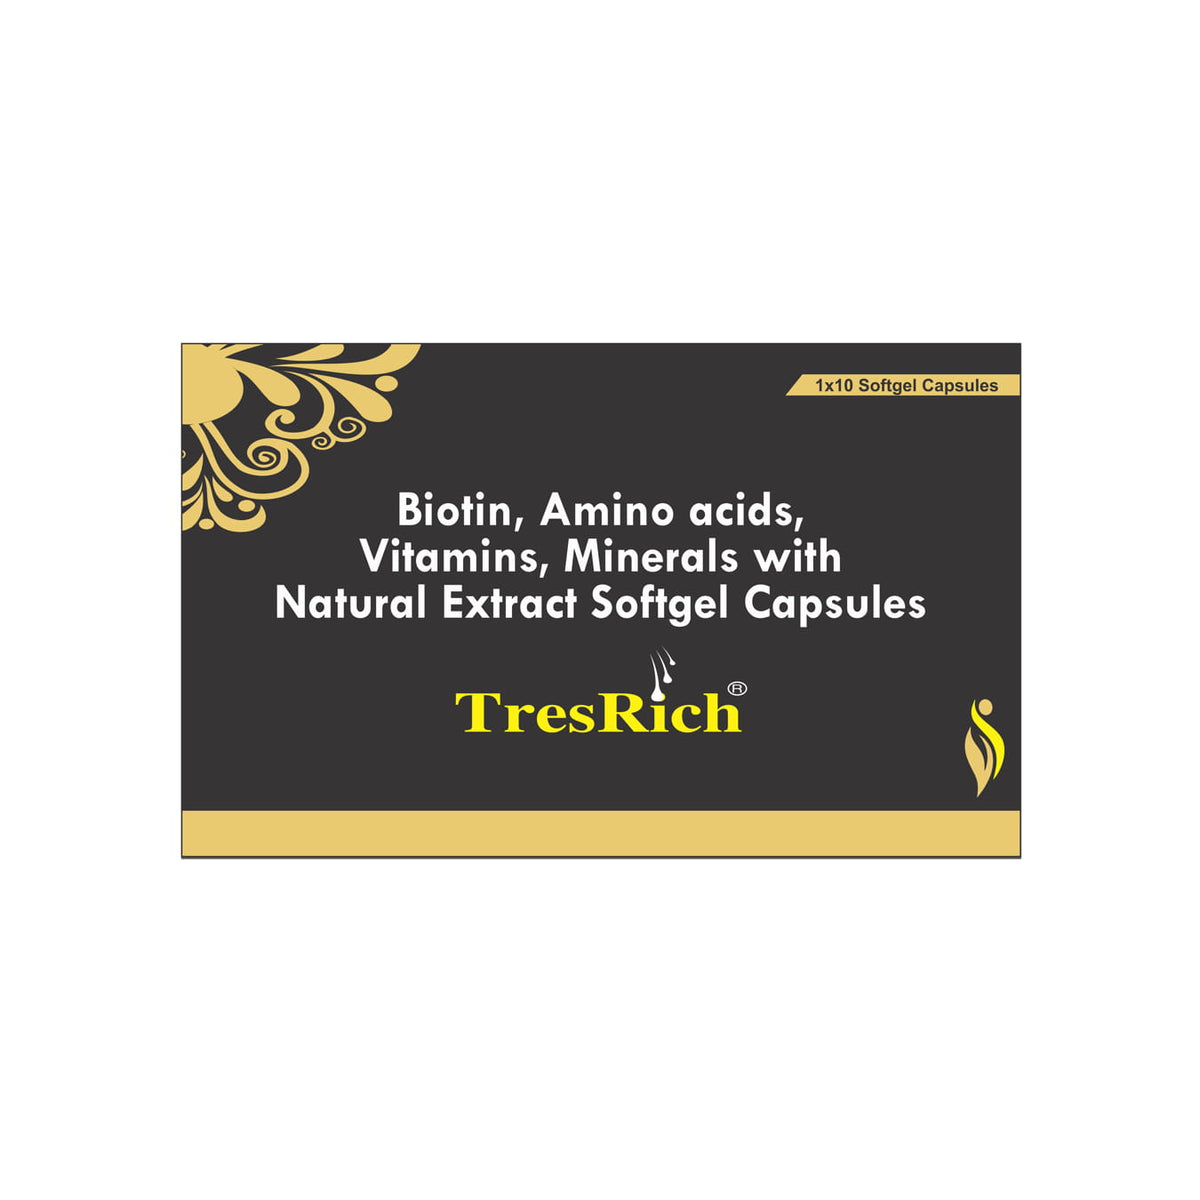 TresRich soft gel capsules, with biotin for hair growth Also contains vitamins, minerals, amino acids and natural extracts